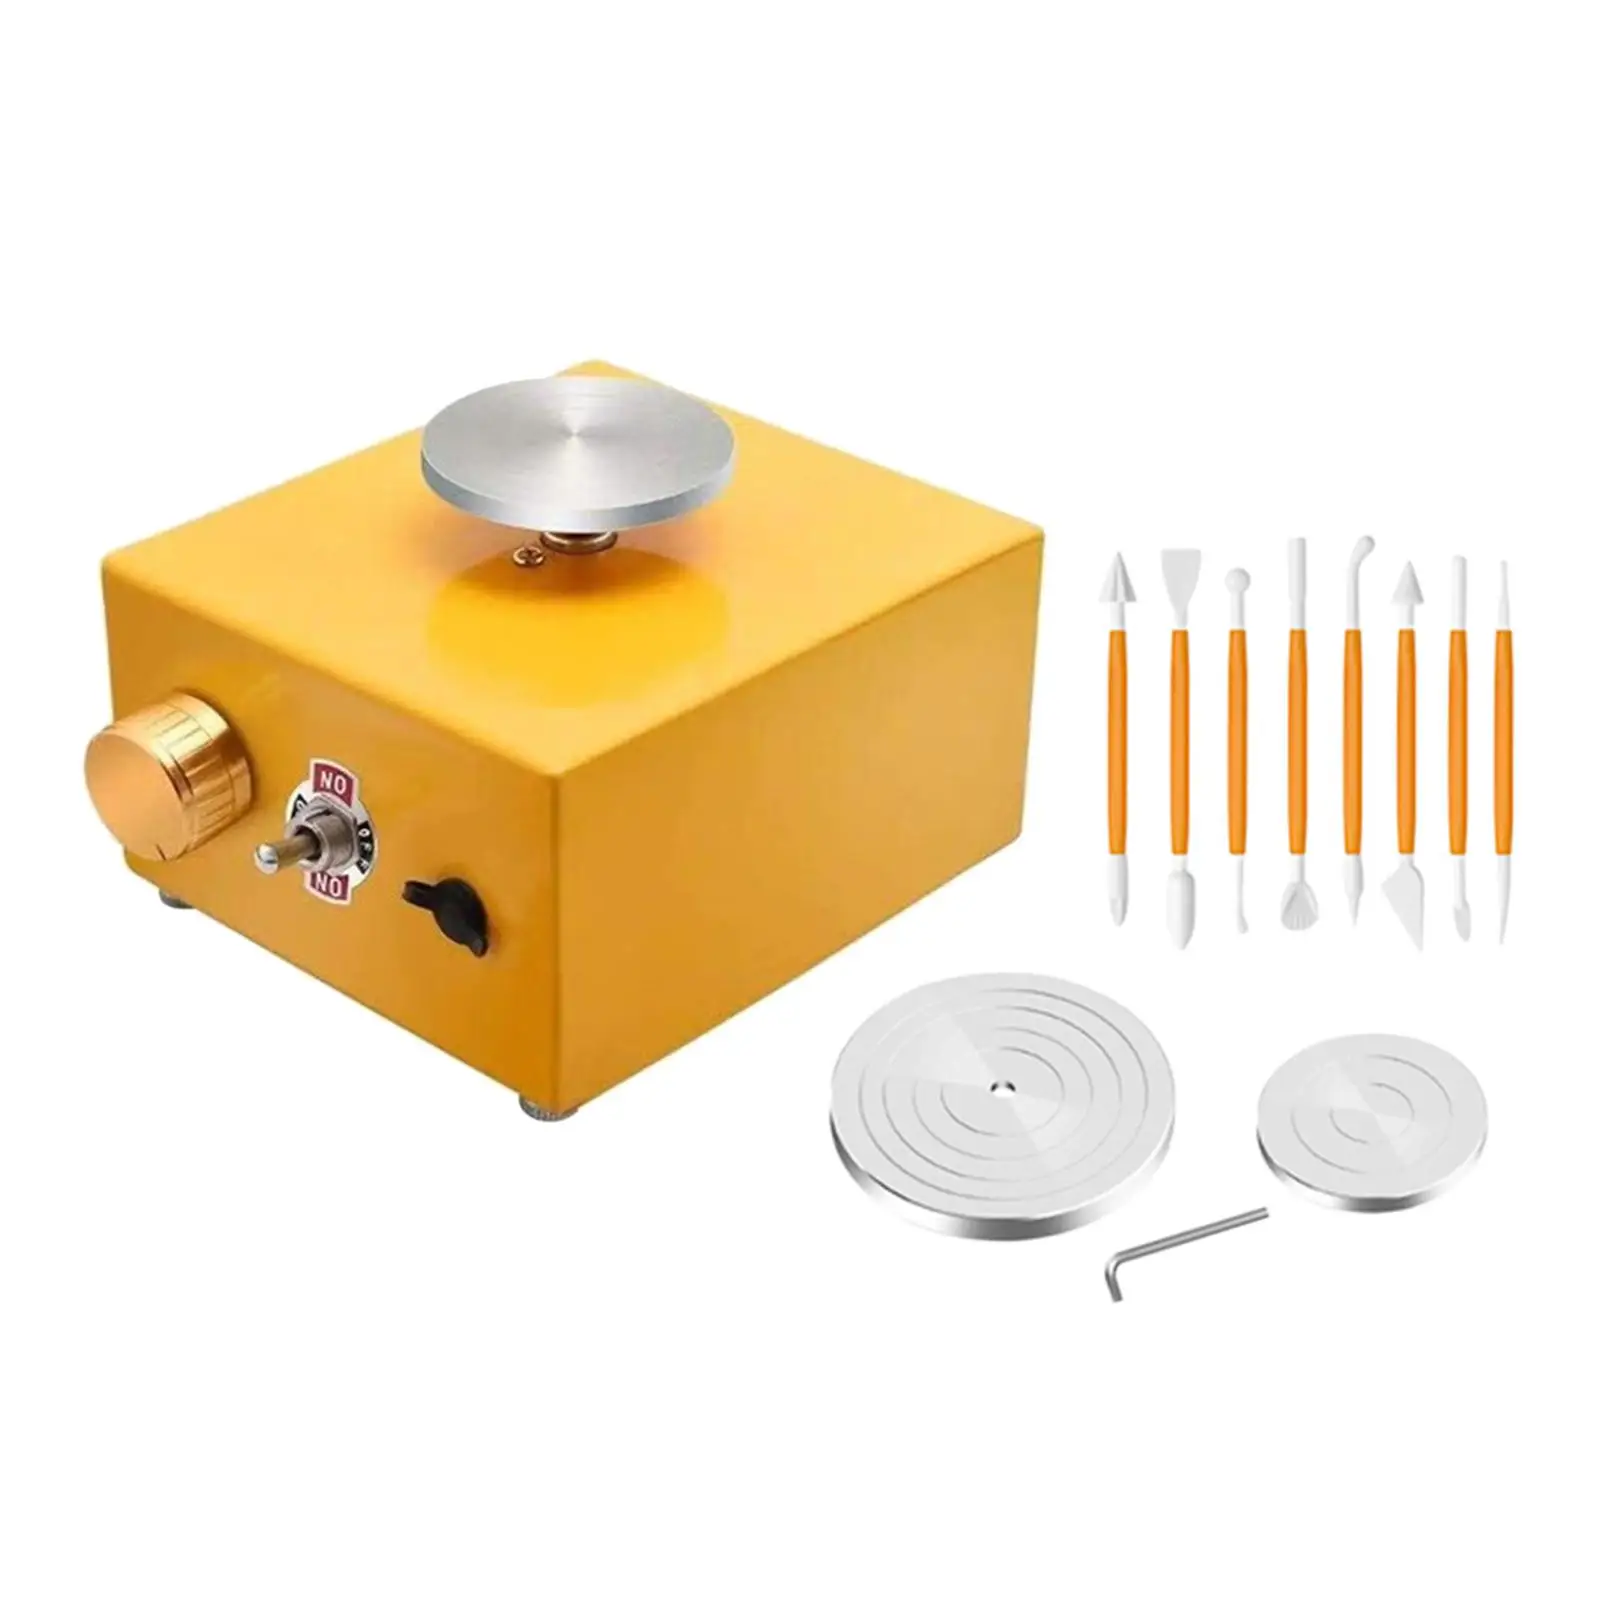 Electric Pottery Wheel Mini Turntable Crafts Clay Making Wheel Ceramic Tool Machine for Children Adults Home Use Beginner